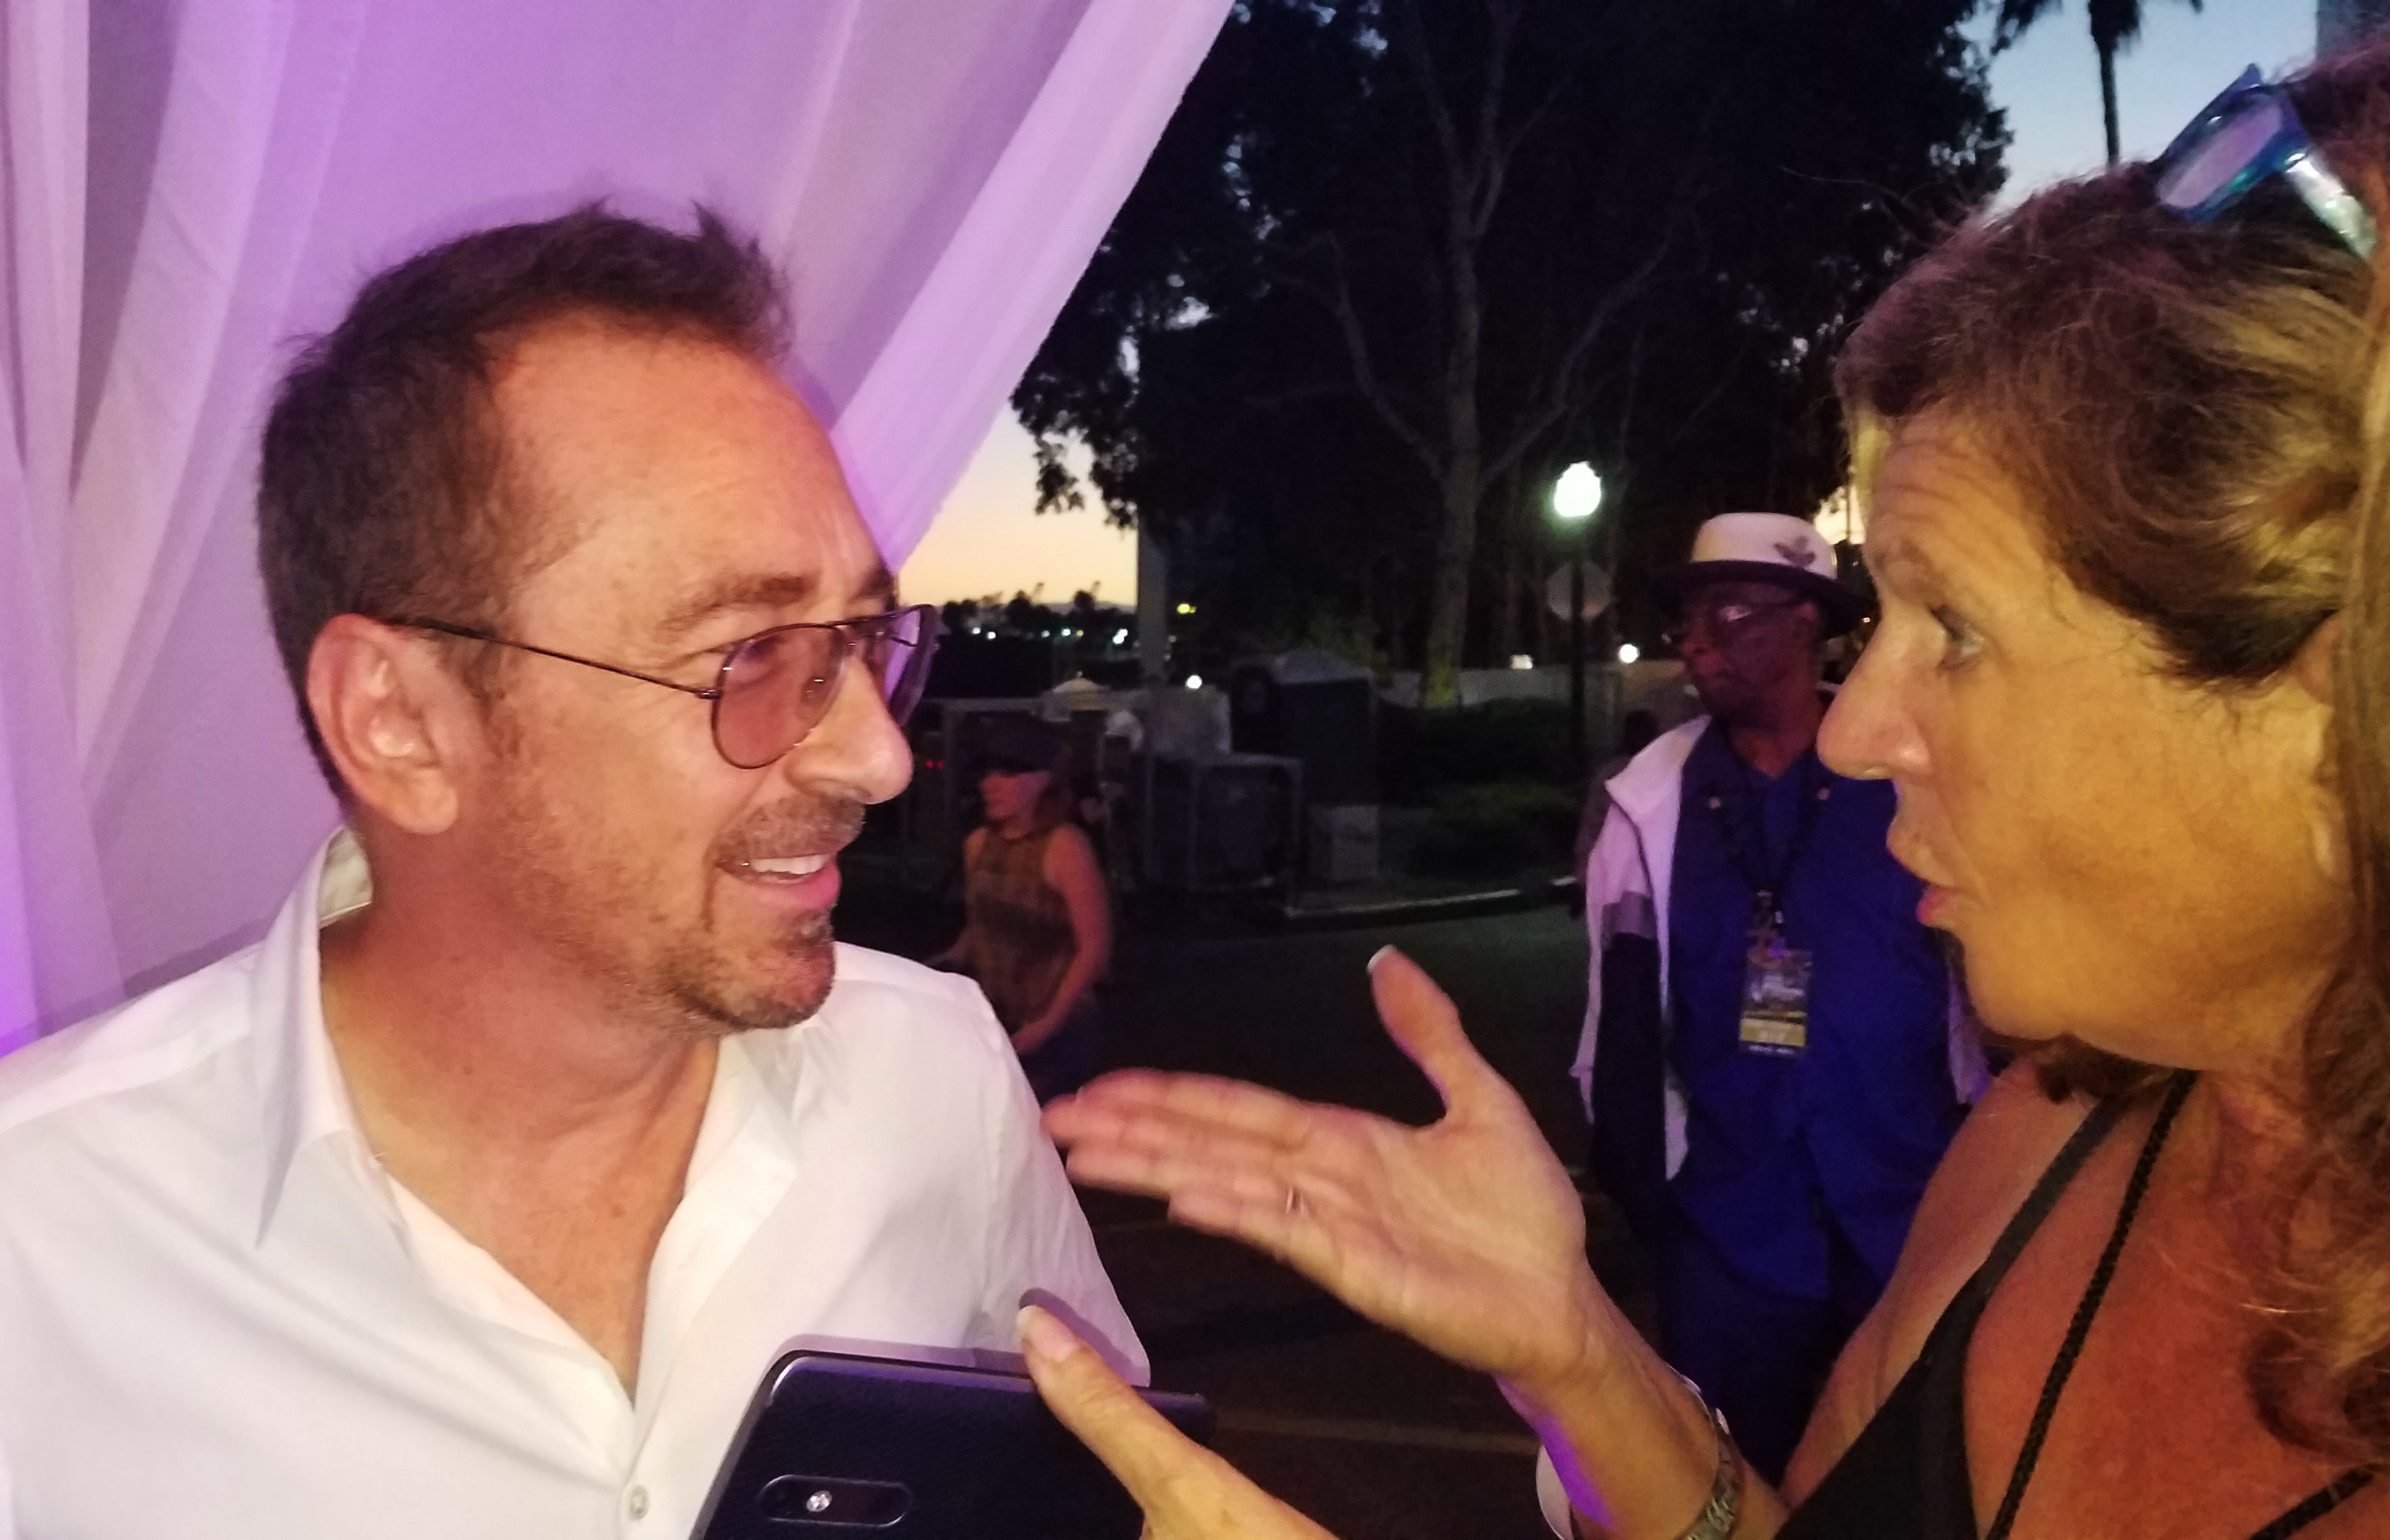 Brian Simpson being interviewed by Sheryl Aronson/The Hollywood 360